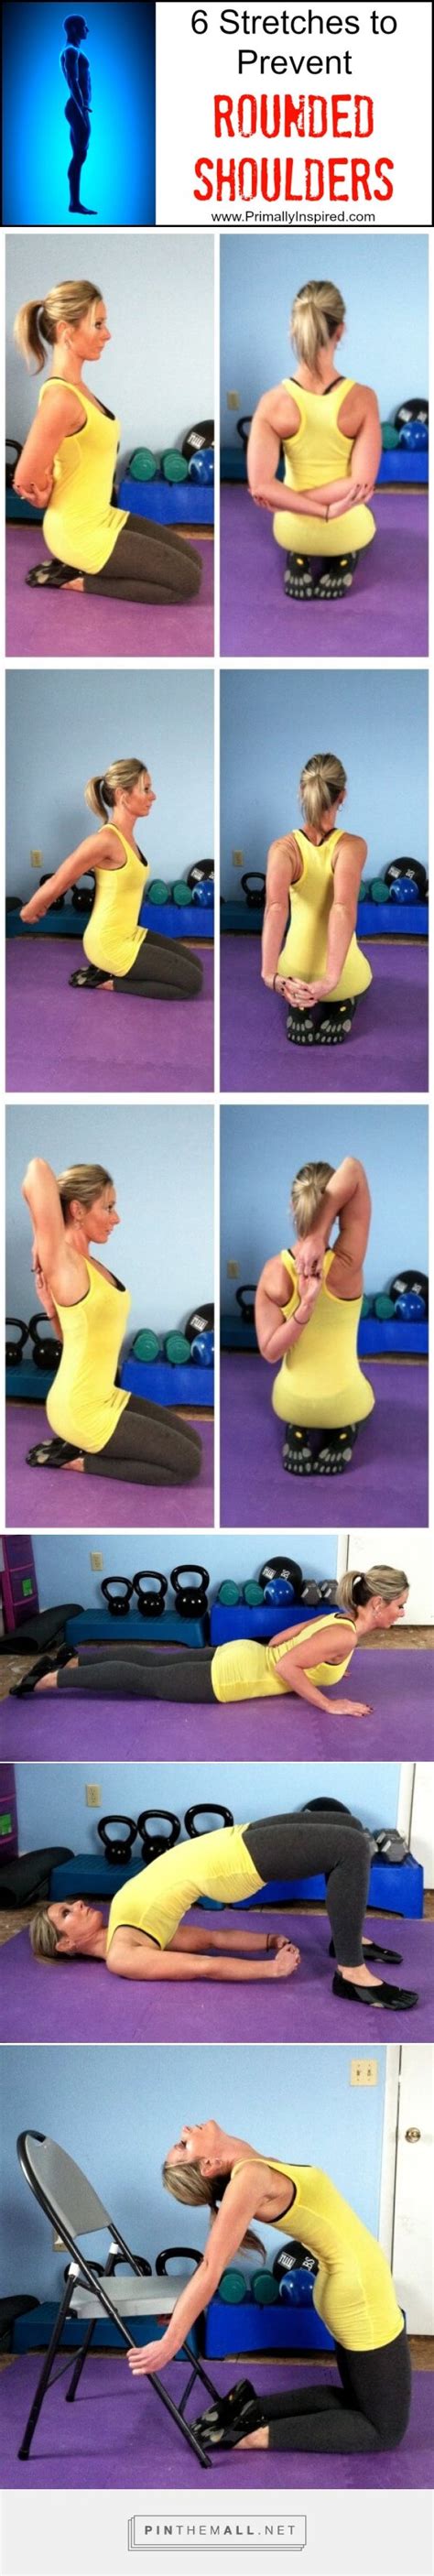 6 Stretches To Prevent Rounded Shoulders A Grouped Images Picture